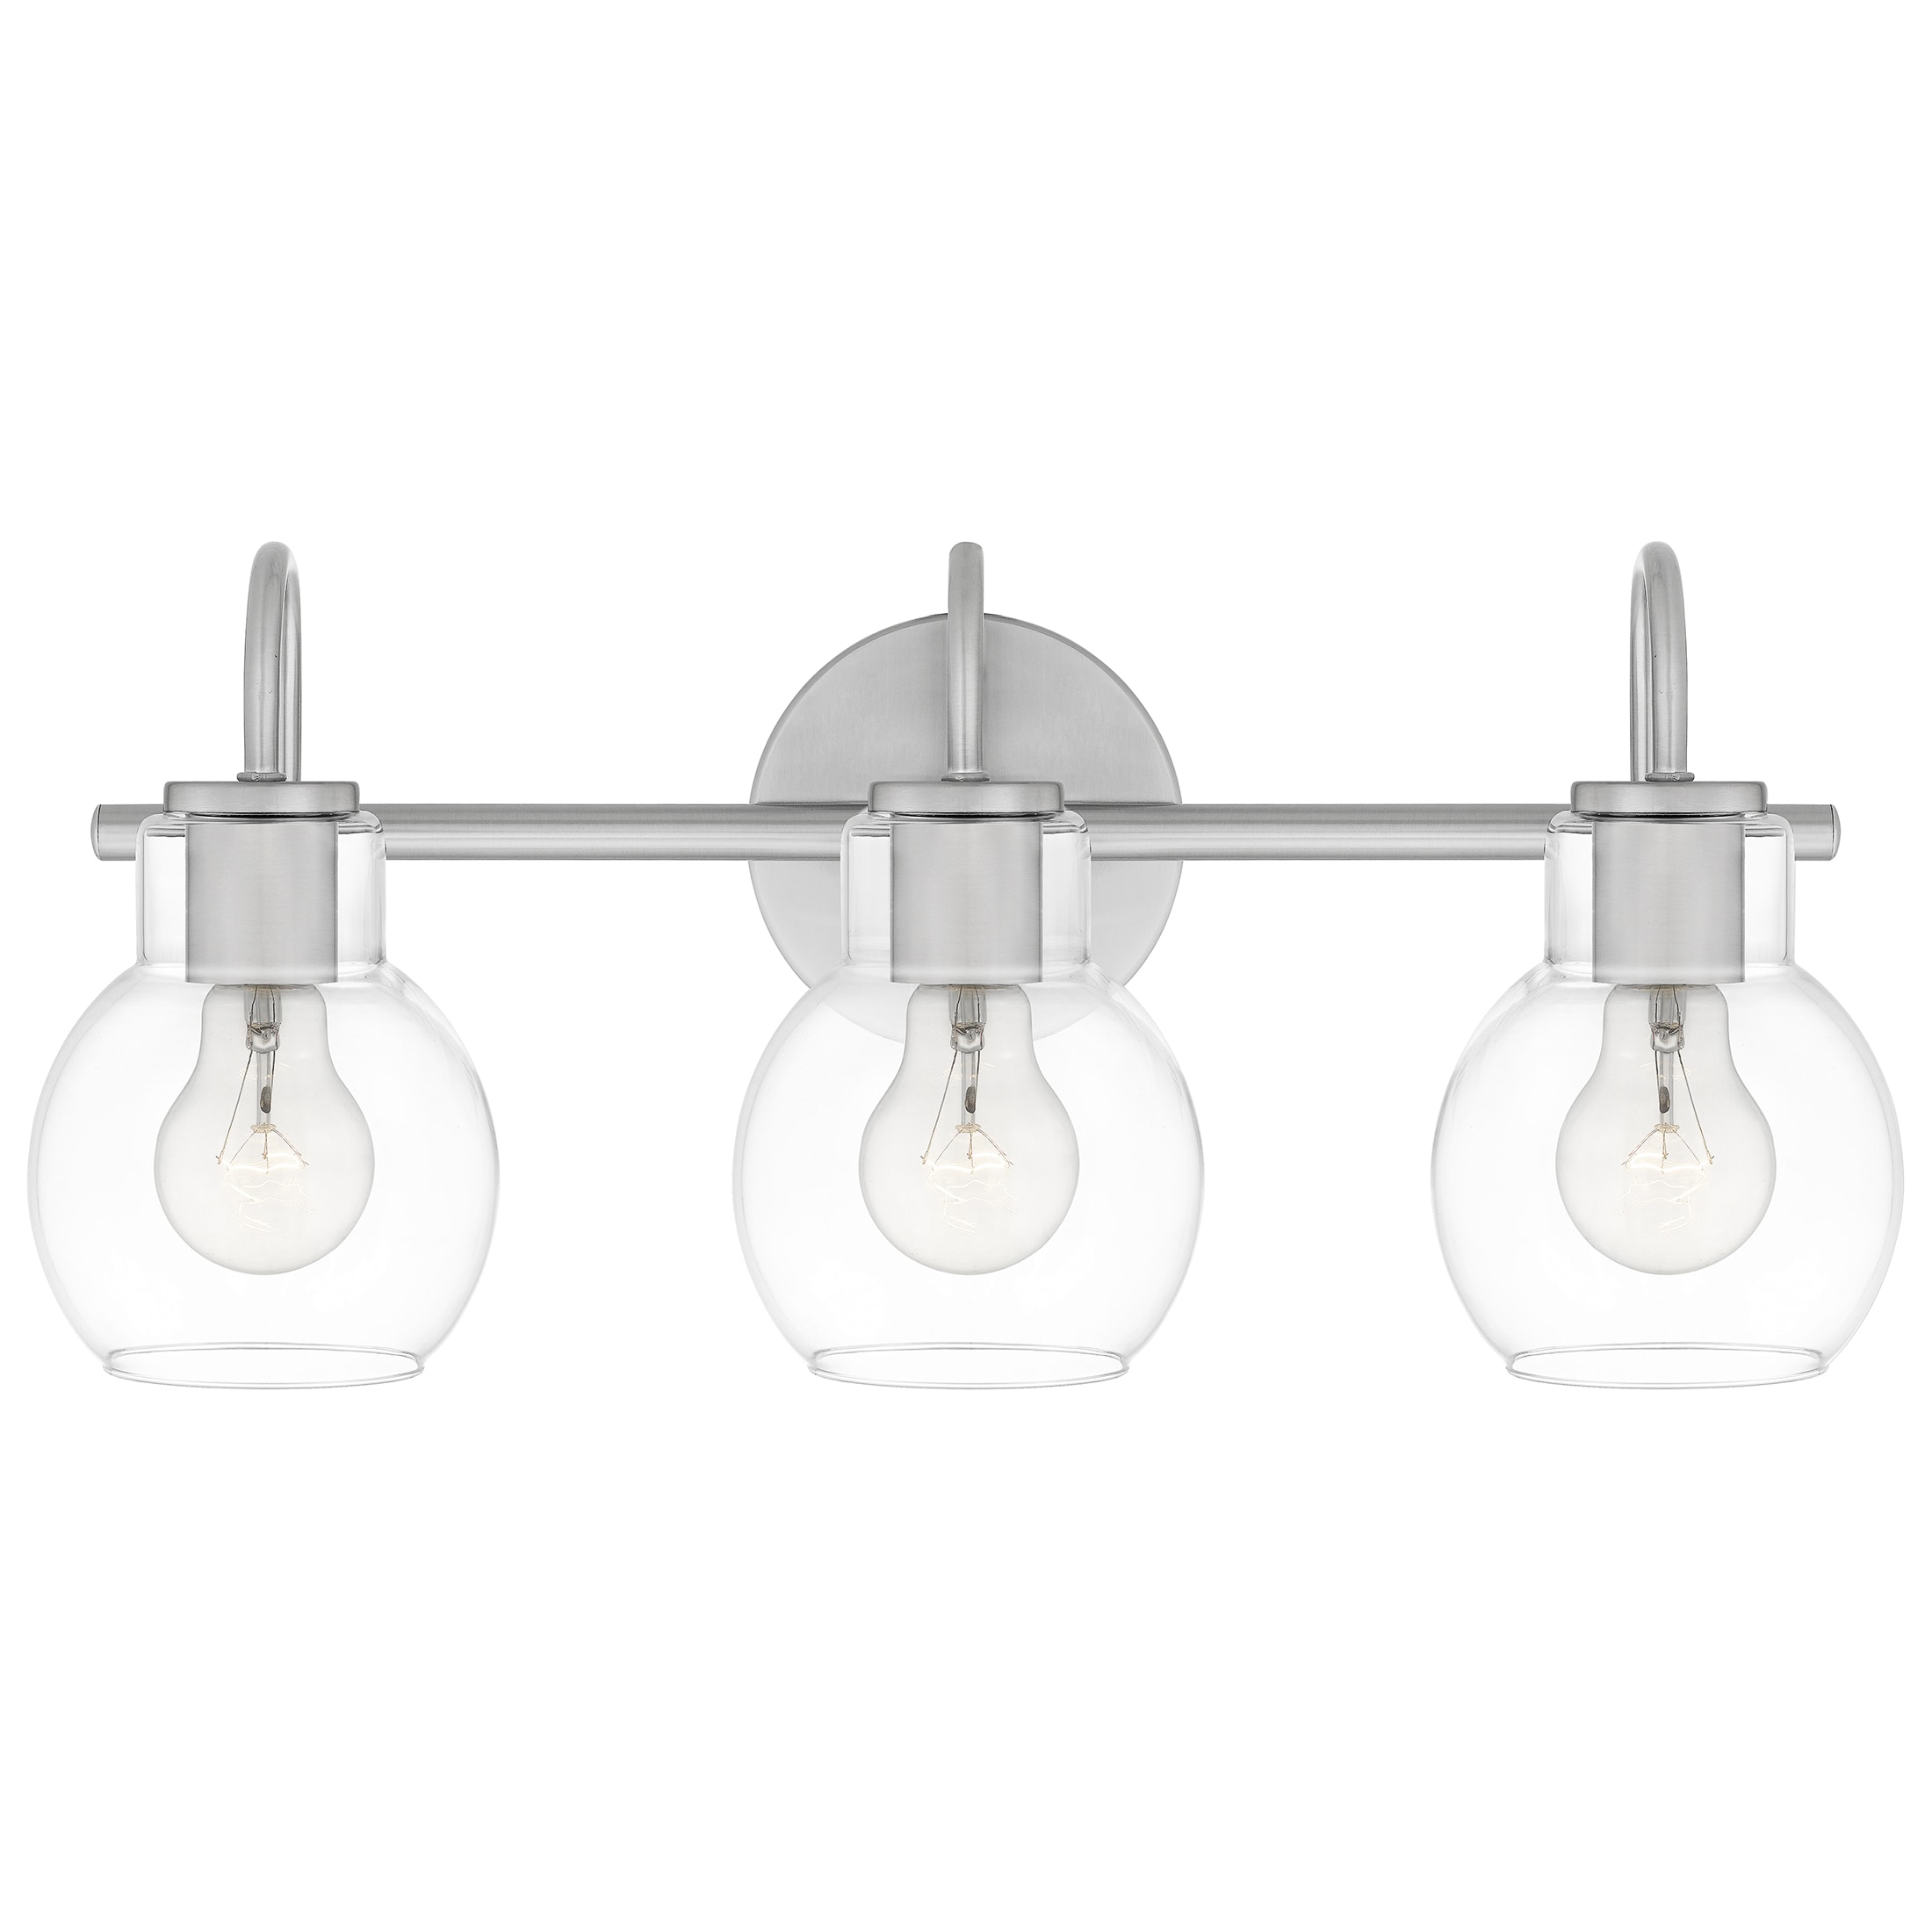 Quoizel UPTR8604IS Uptown Theater Row 240W Vanity Light Fixture Imperial Silver 